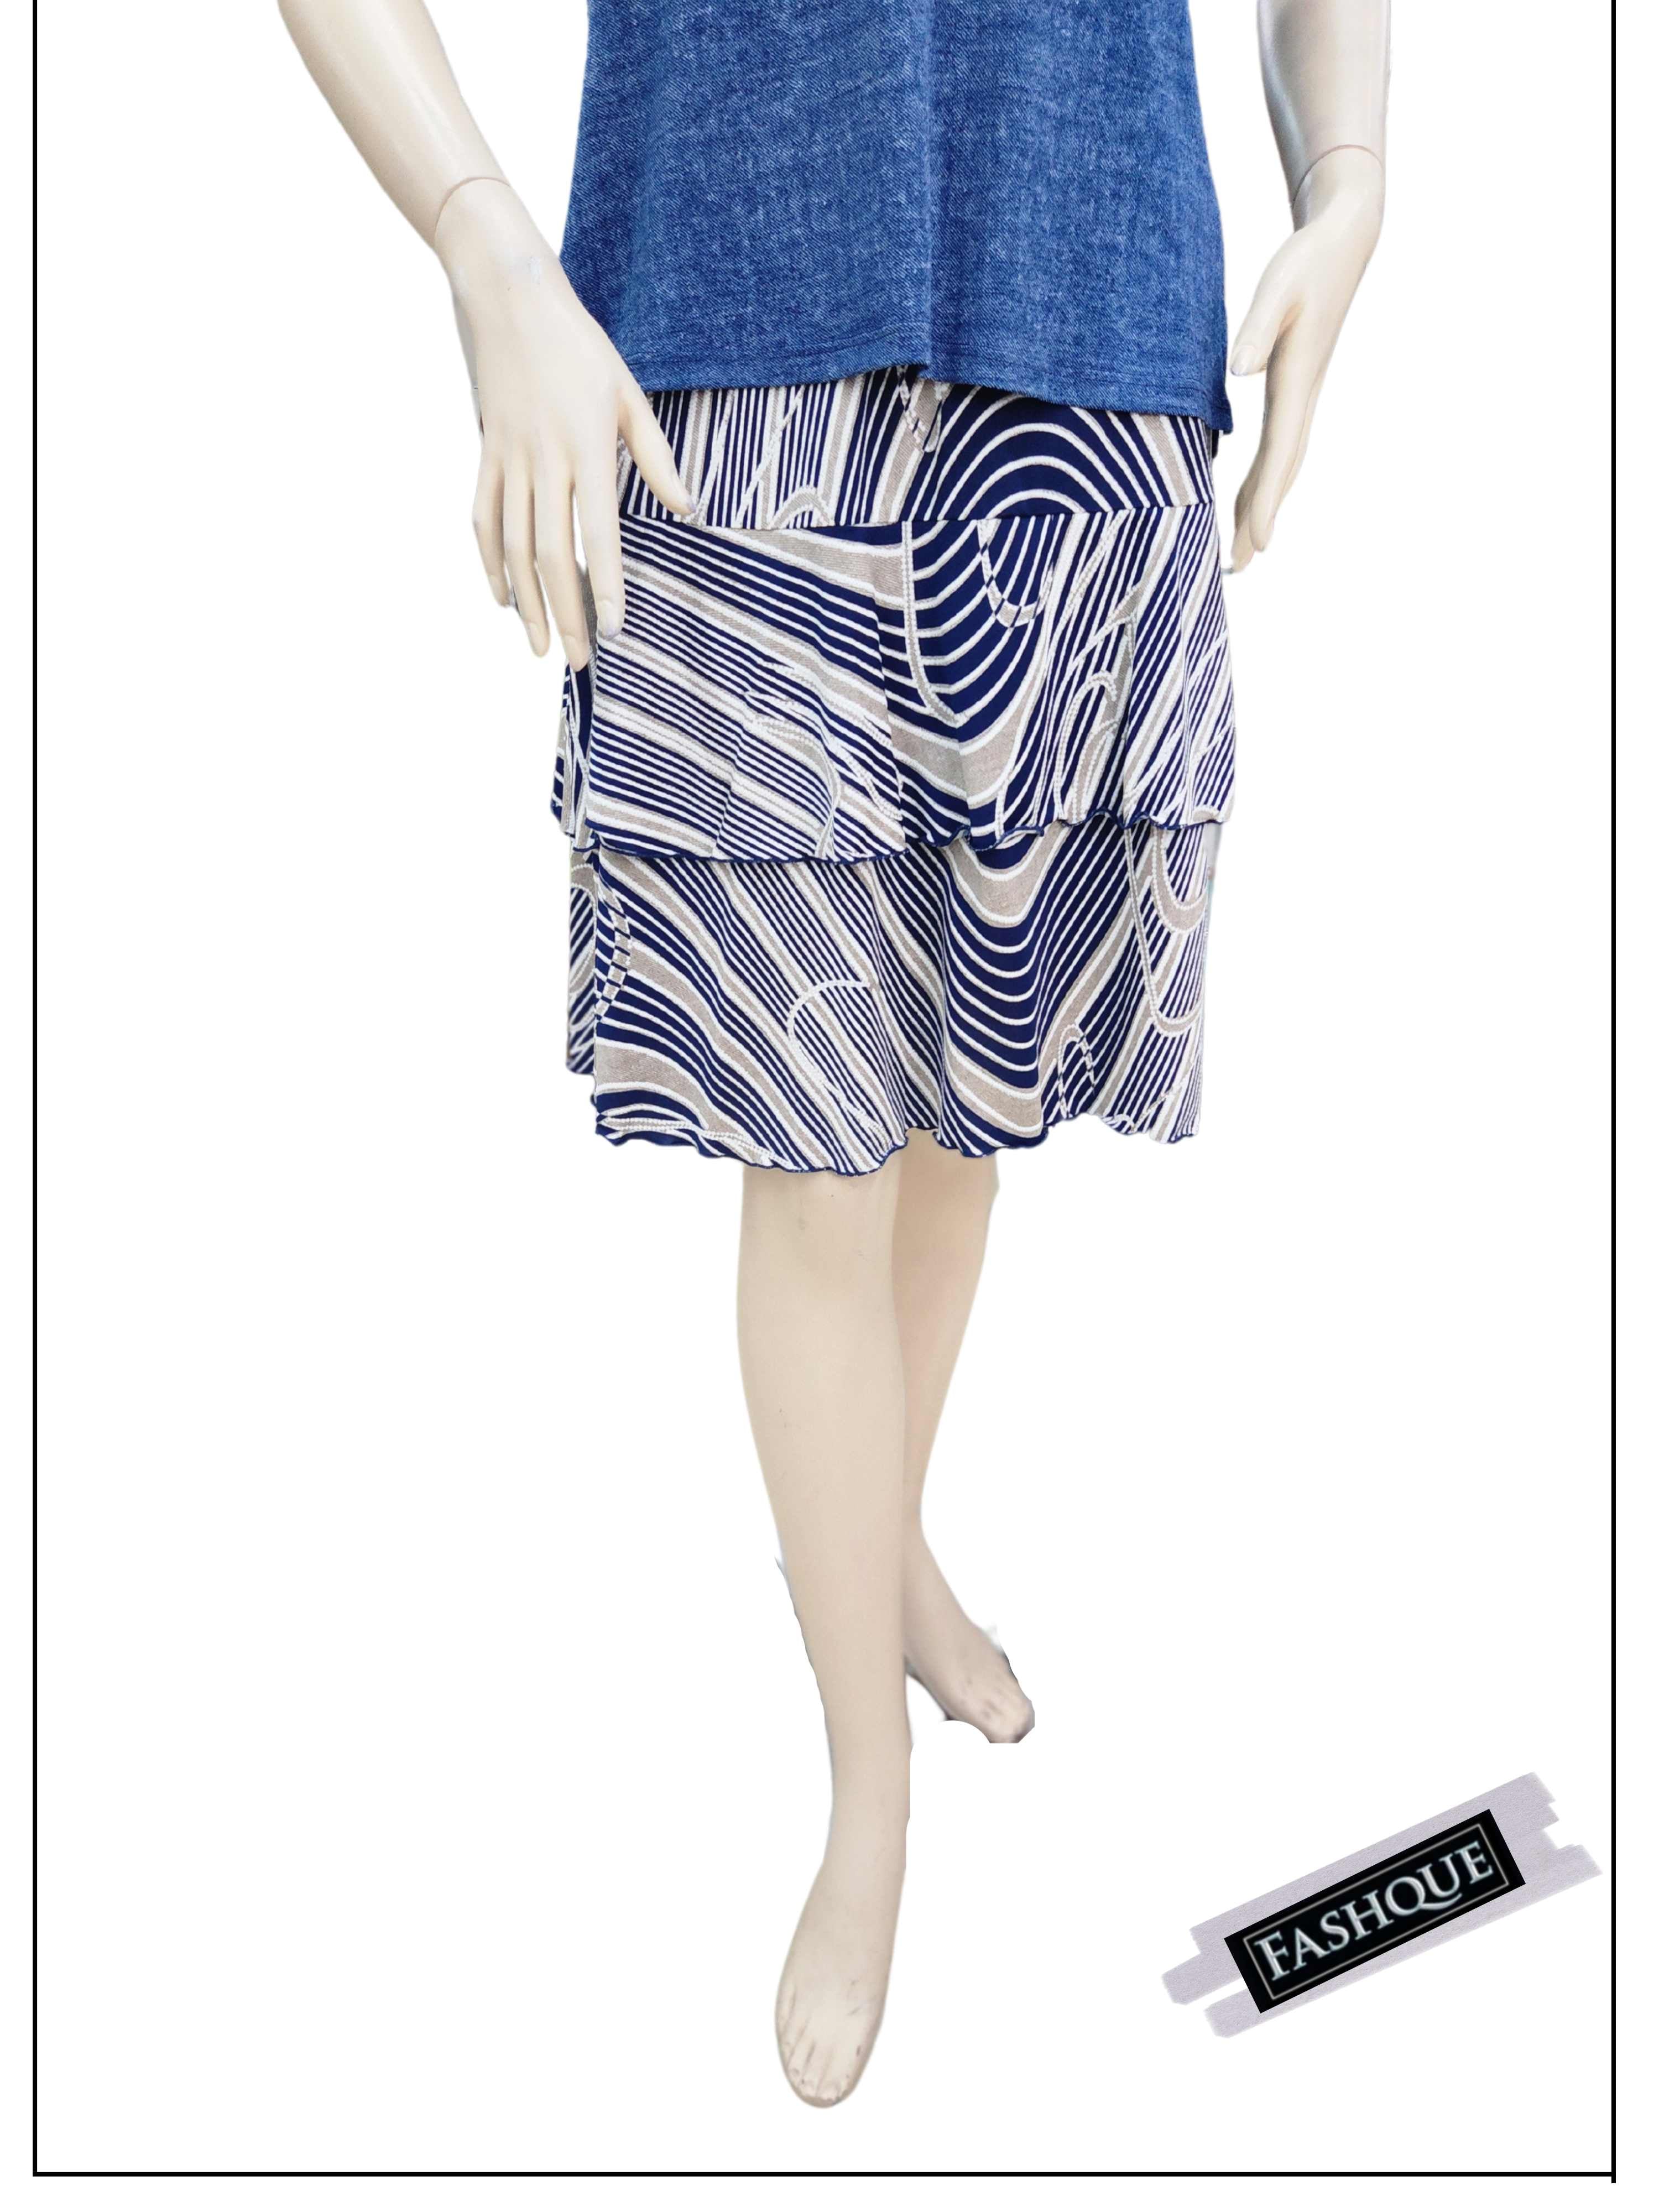 FASHQUE - 3 Tier PRINTED SKORT with the Ruffle in the center - SH001 SALE